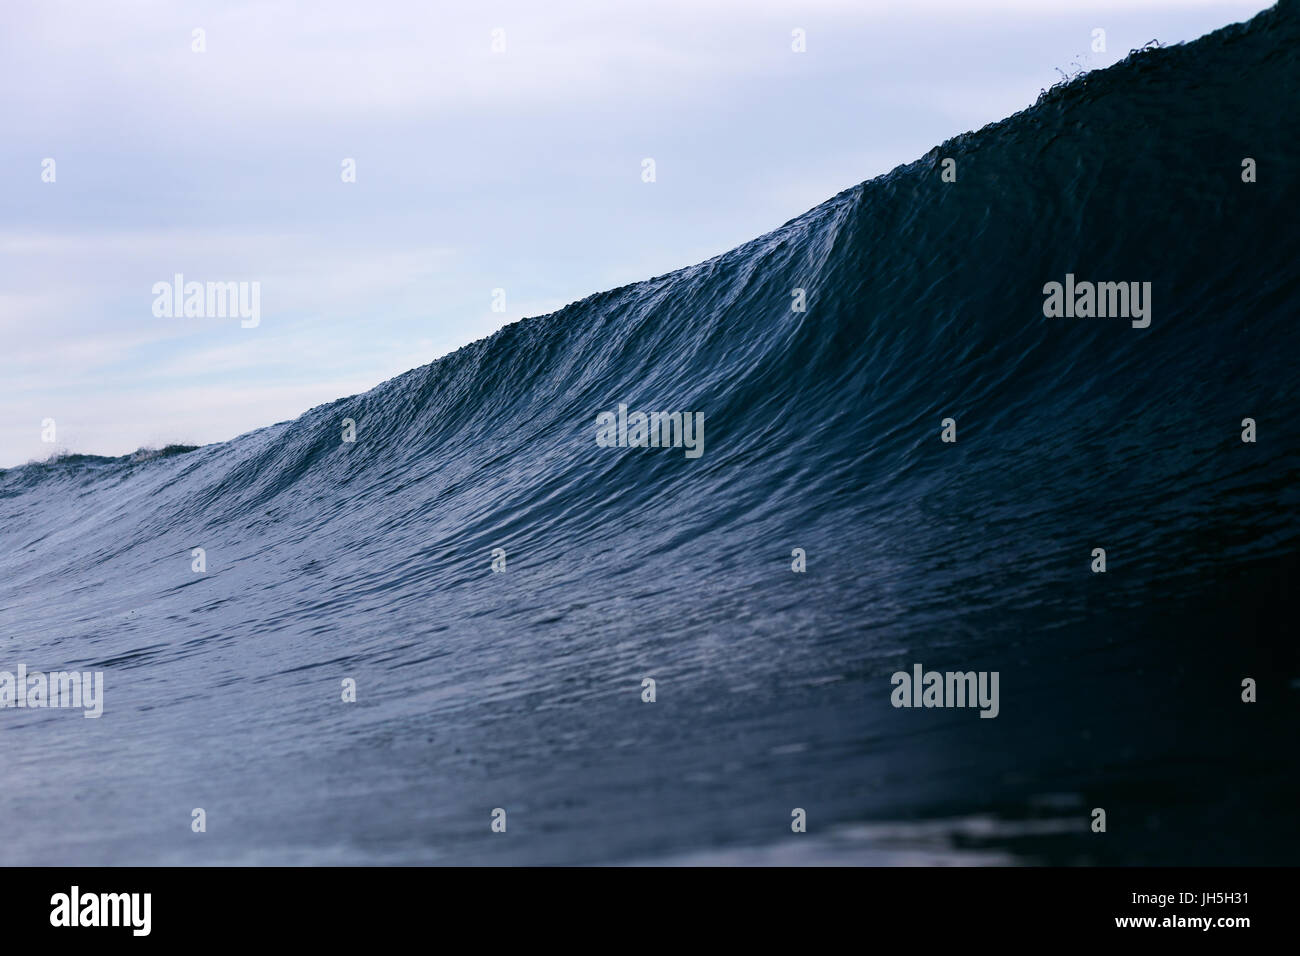 A dark, ominous ocean wave looms on a stormy overcast day. Stock Photo